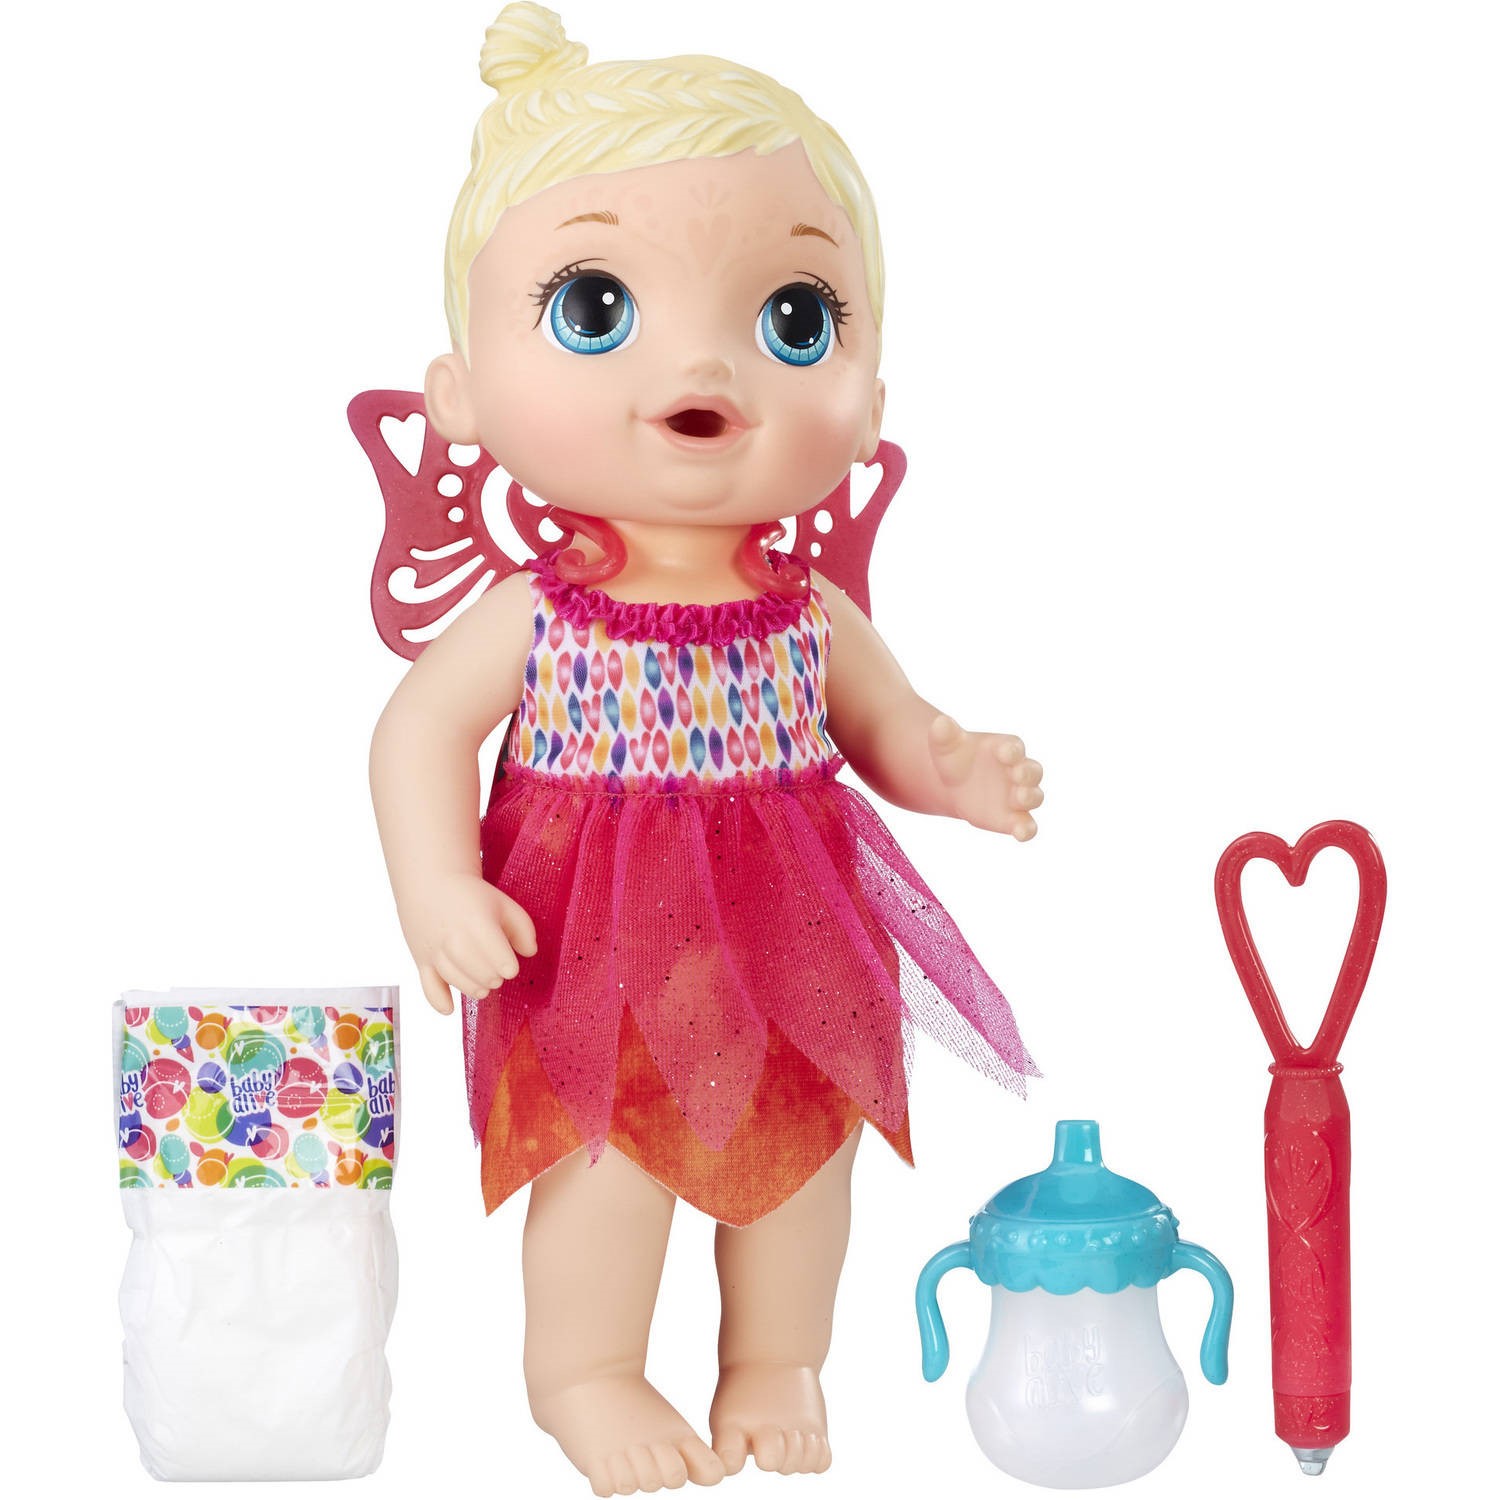 Baby Alive: Face Paint Fairy Blonde Hair Doll Playset - image 1 of 10